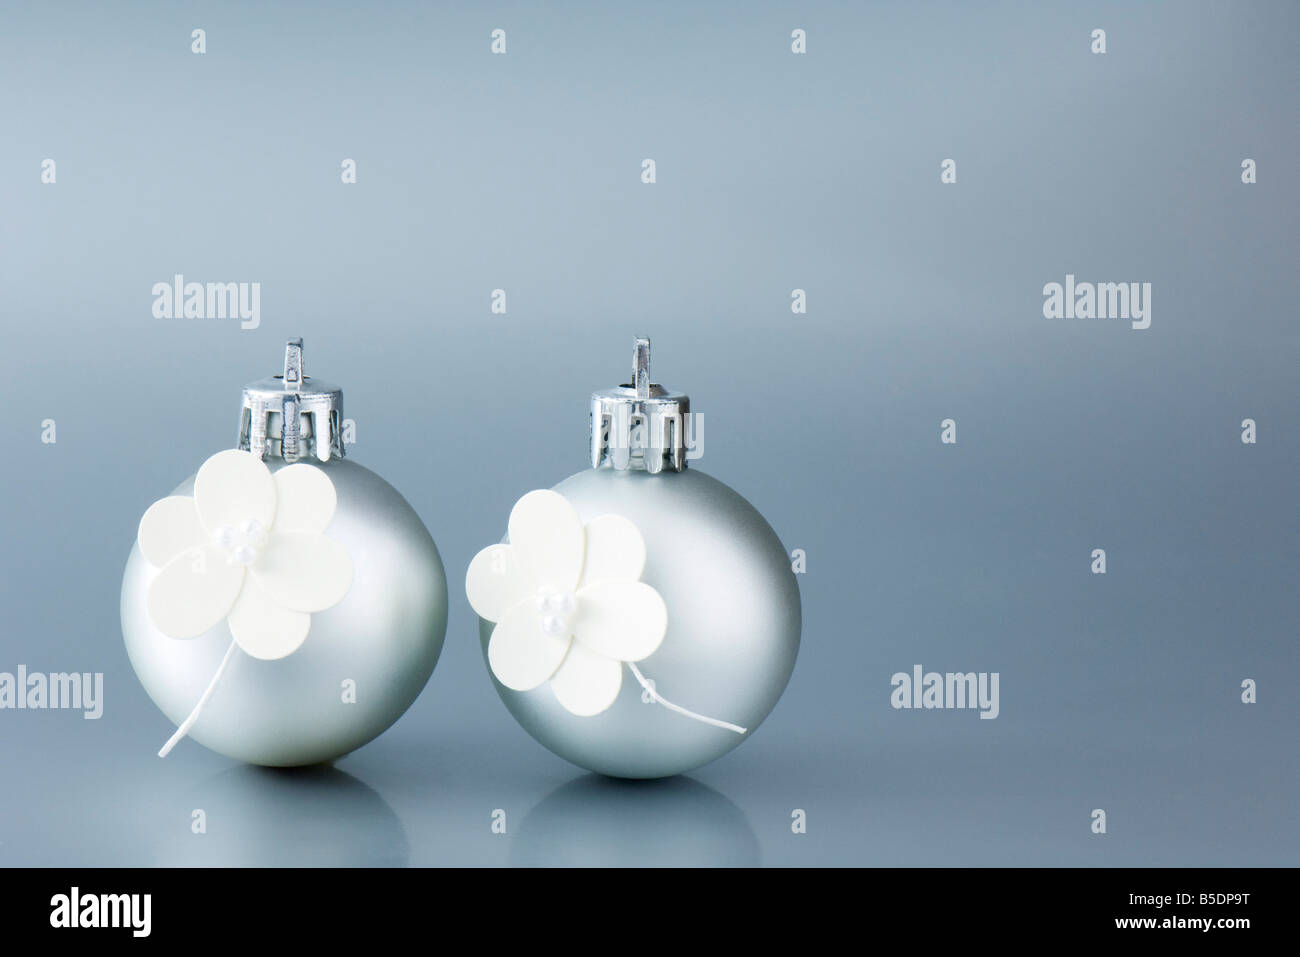 Two silver Christmas tree ornaments decorated with white flowers Stock Photo